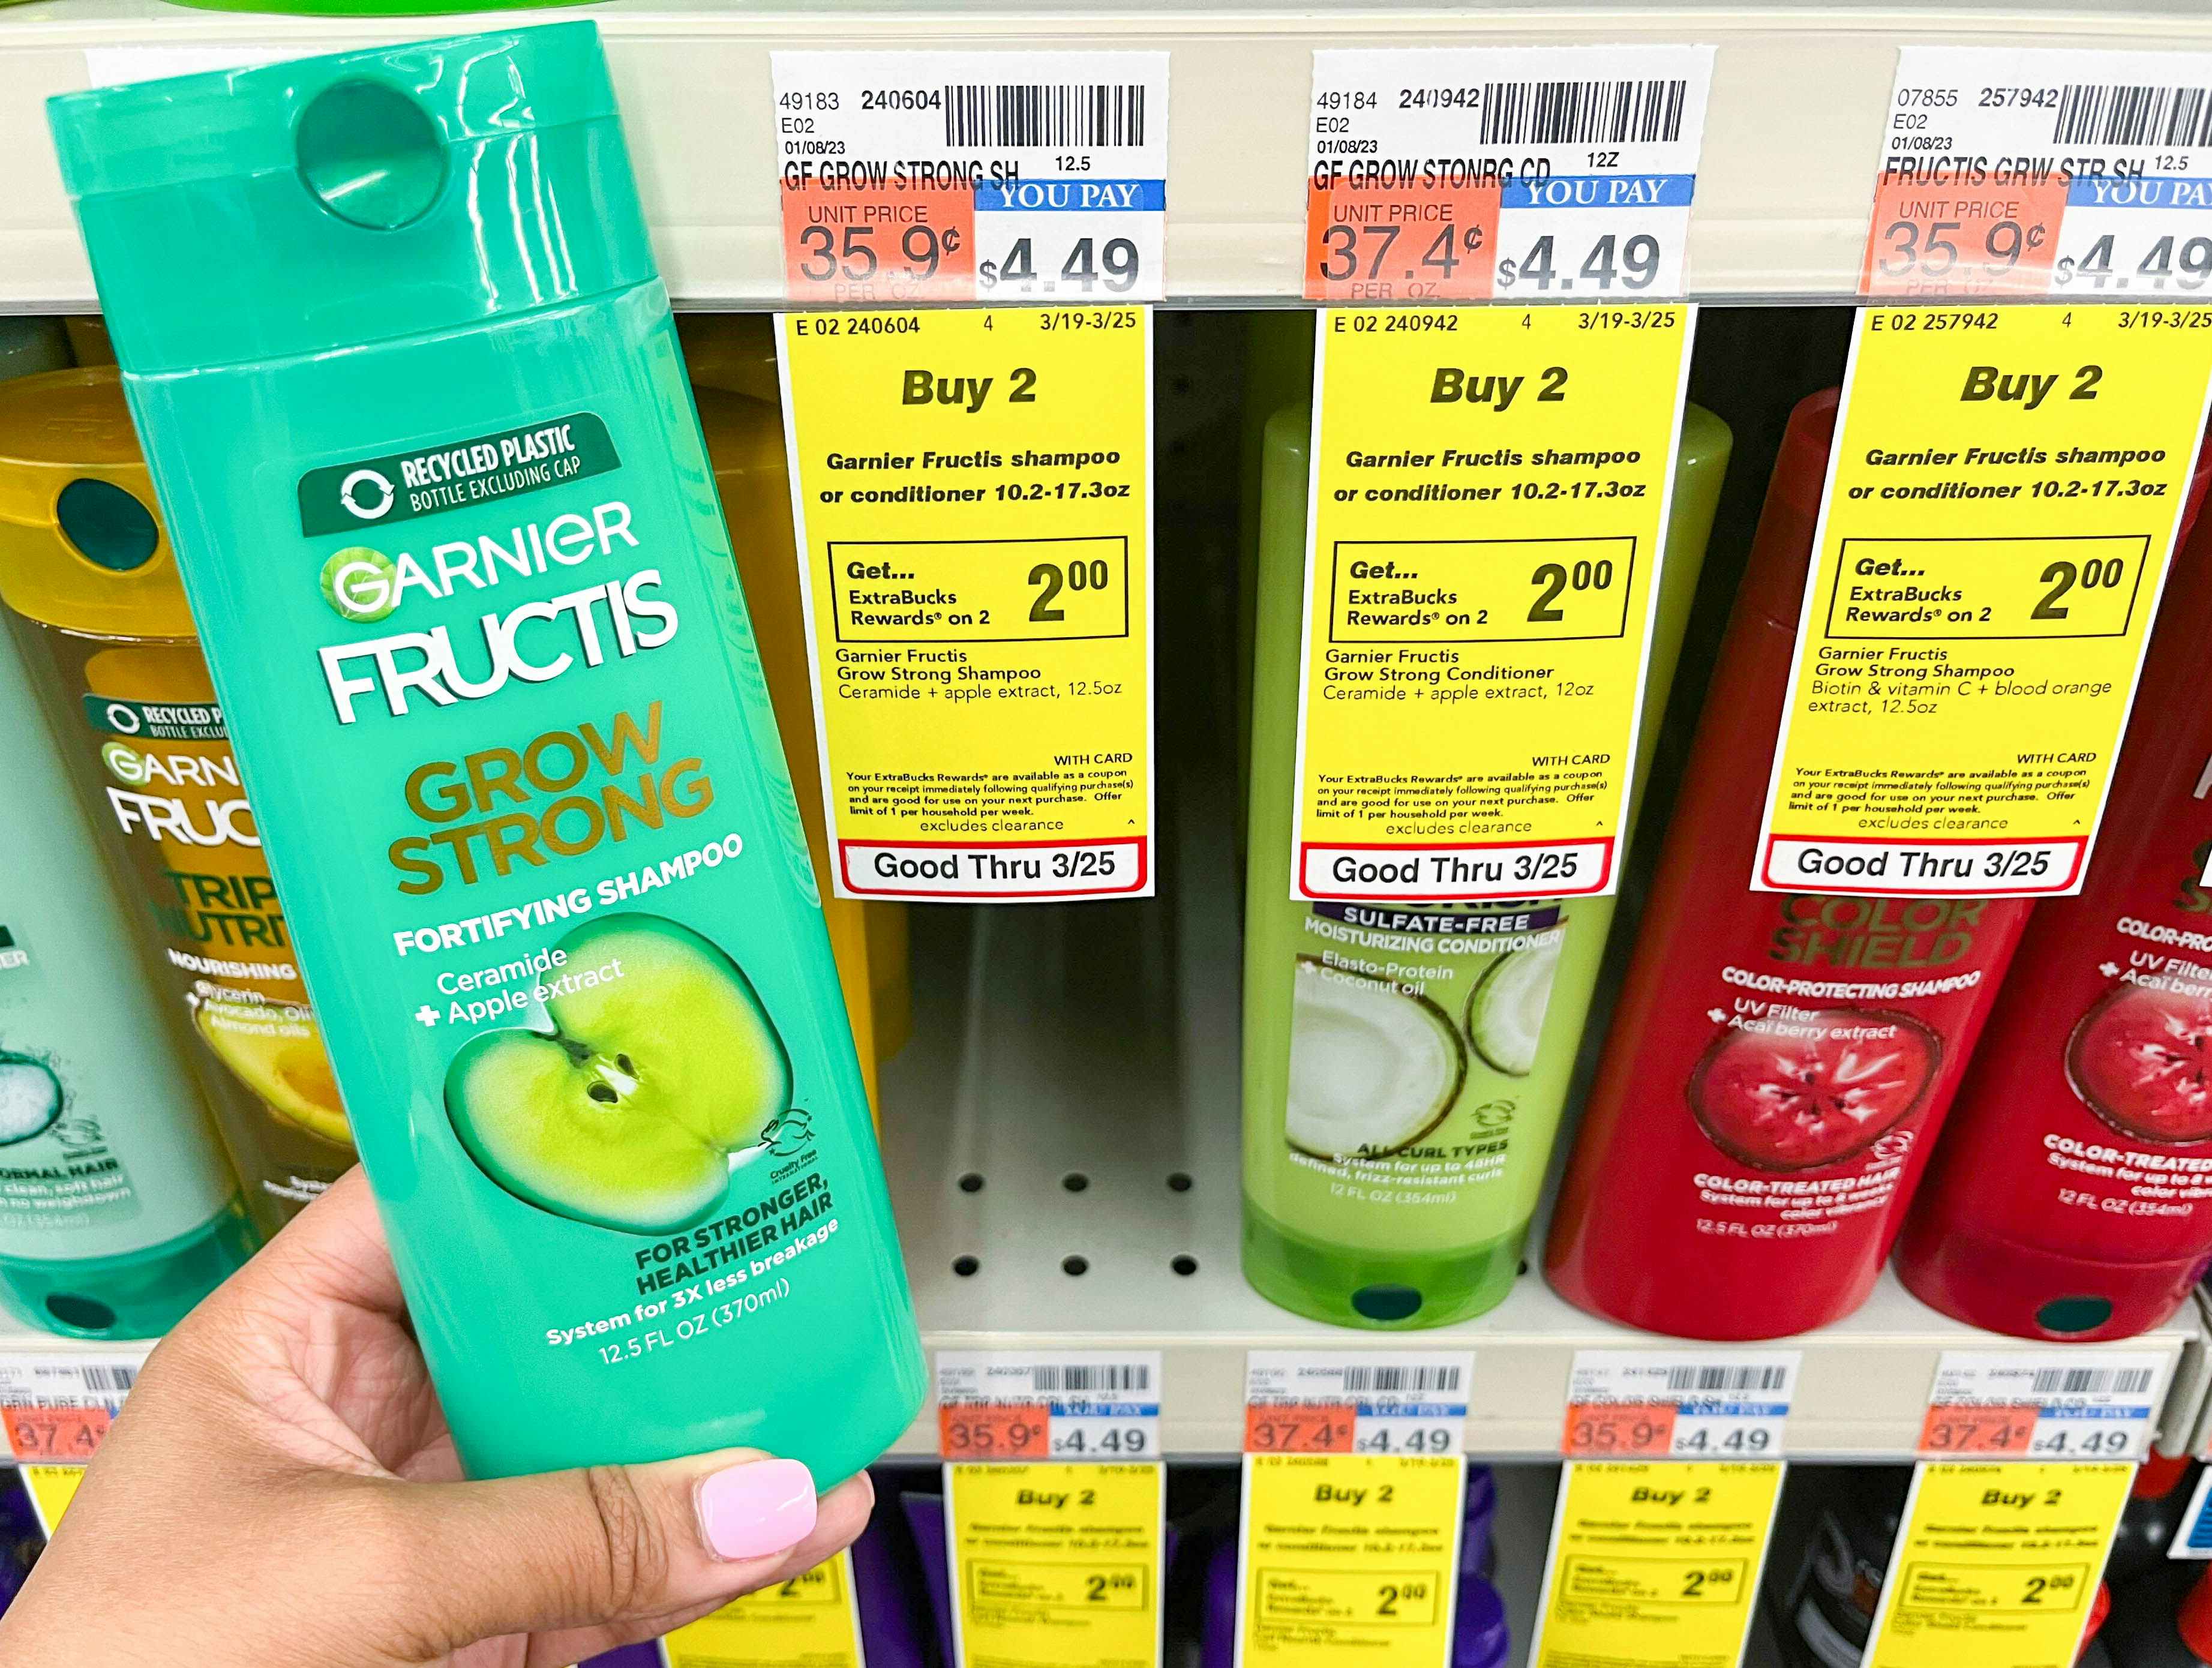 hand holding bottle of Garnier Fructis shampoo next to sales tag